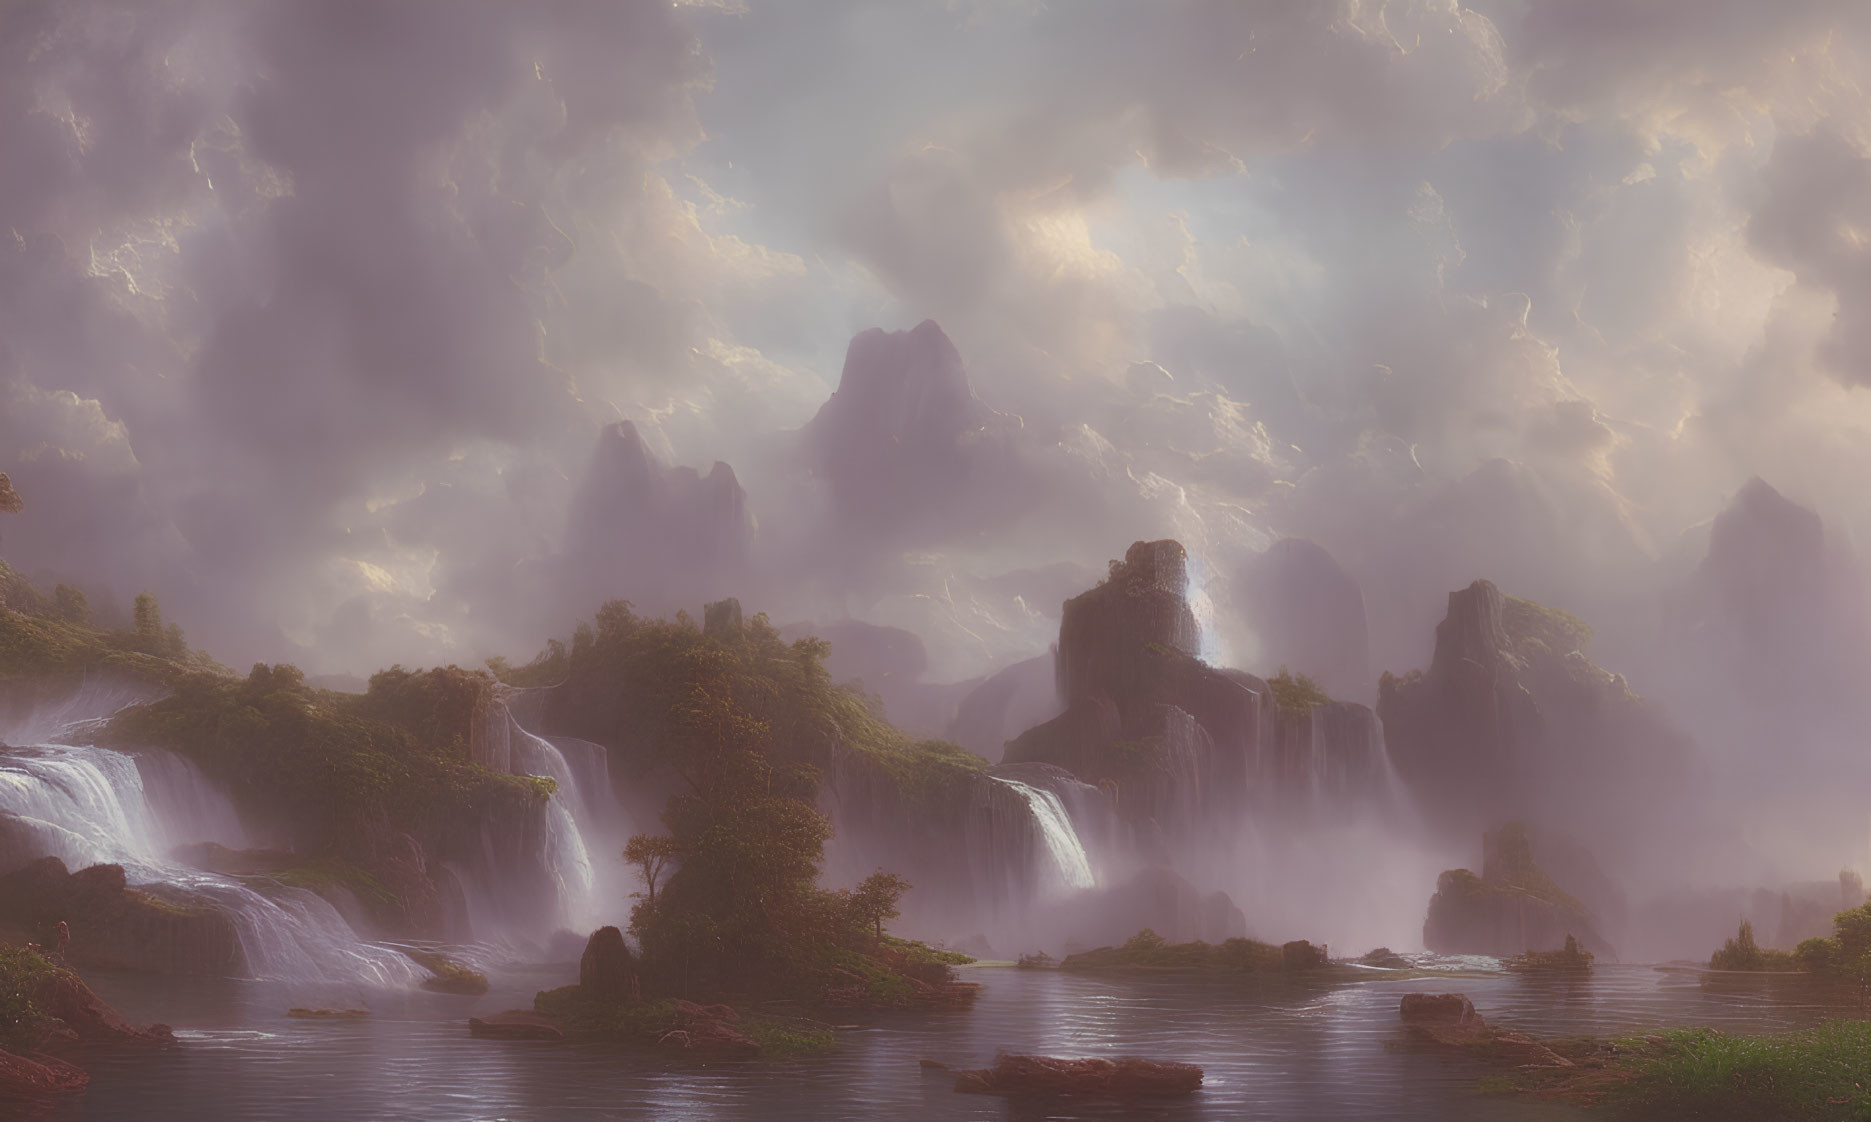 Tranquil landscape with waterfalls, river, peaks, and hazy sky